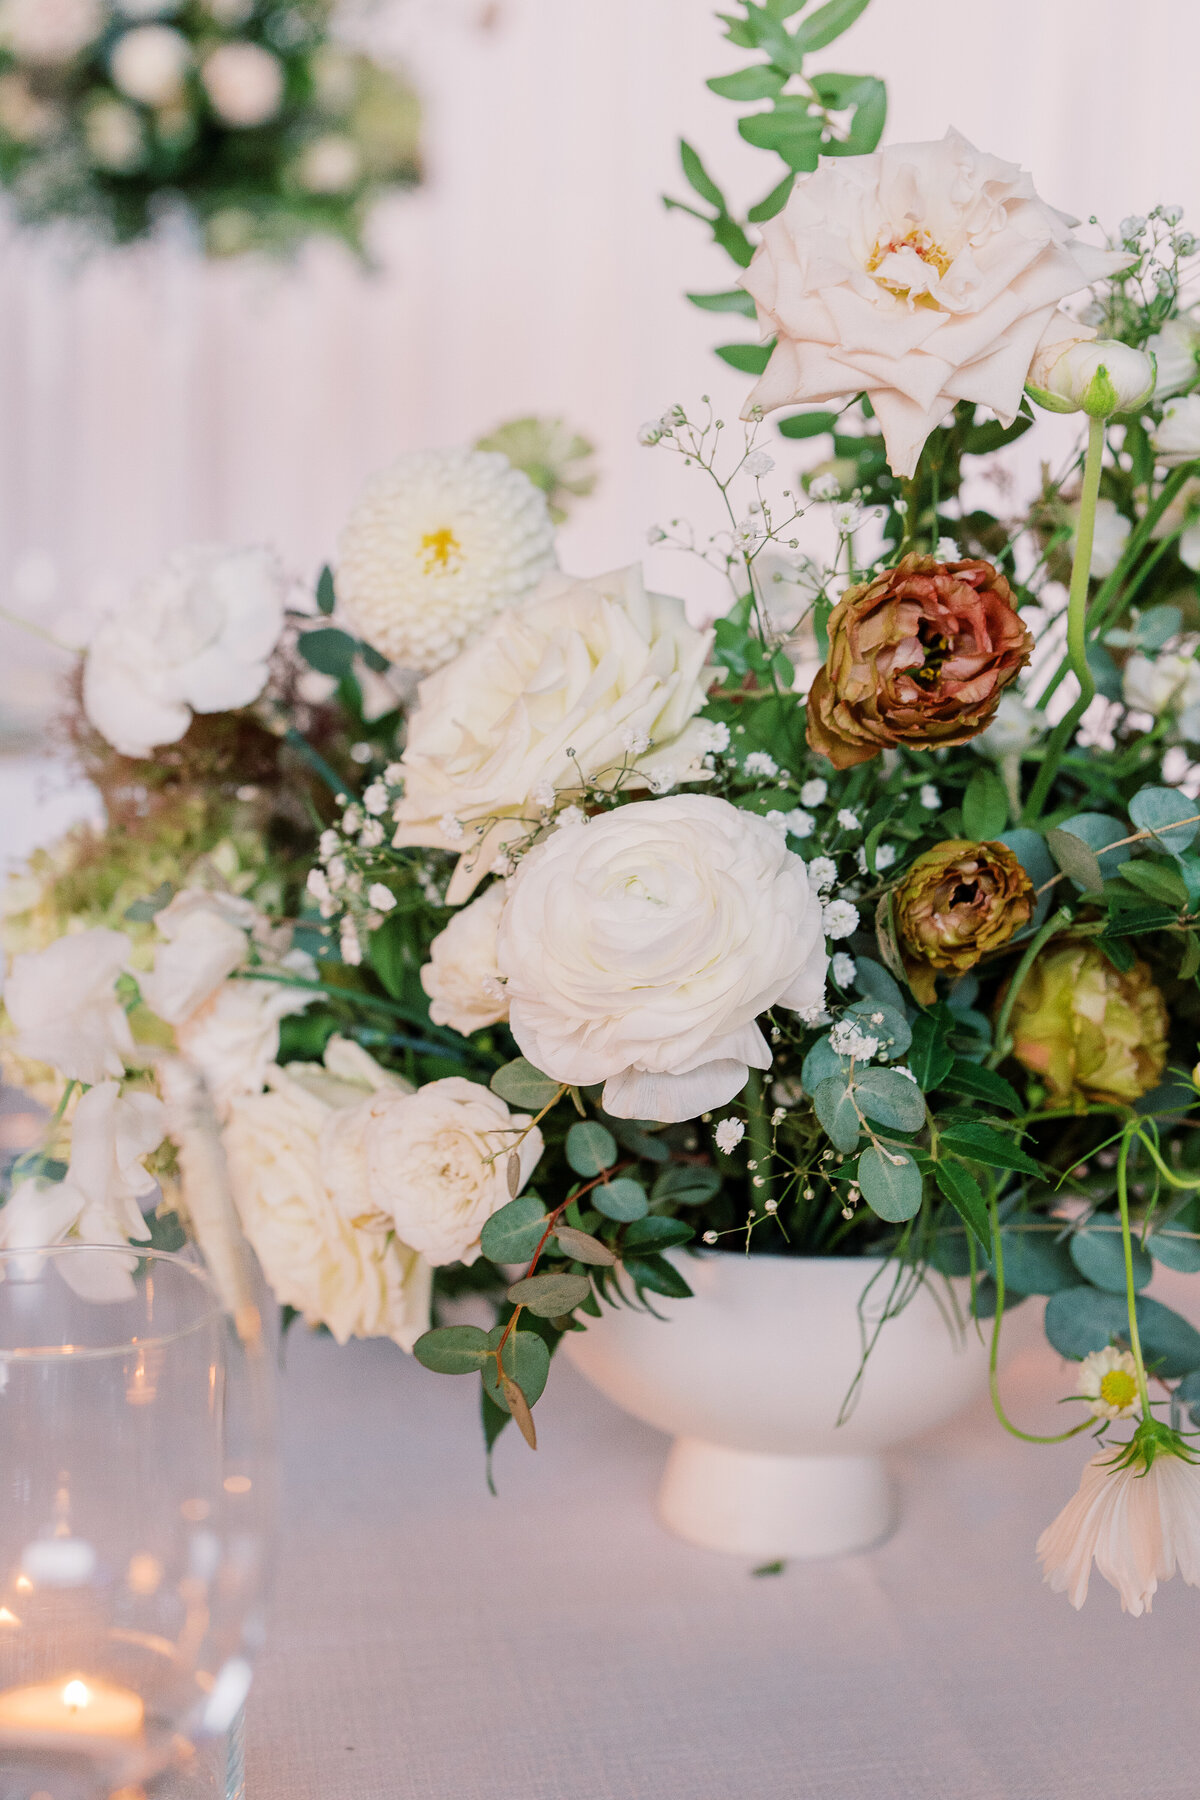 Lush low centerpieces for timeless garden wedding in downtown Nashville. Summer wedding florals in colors of white, cream, green, and taupe. Summer floral design full of roses, ranunculus, hydrangea, cosmos, and lisianthis. Design by Rosemary & Finch Floral Design in Nashville, TN.